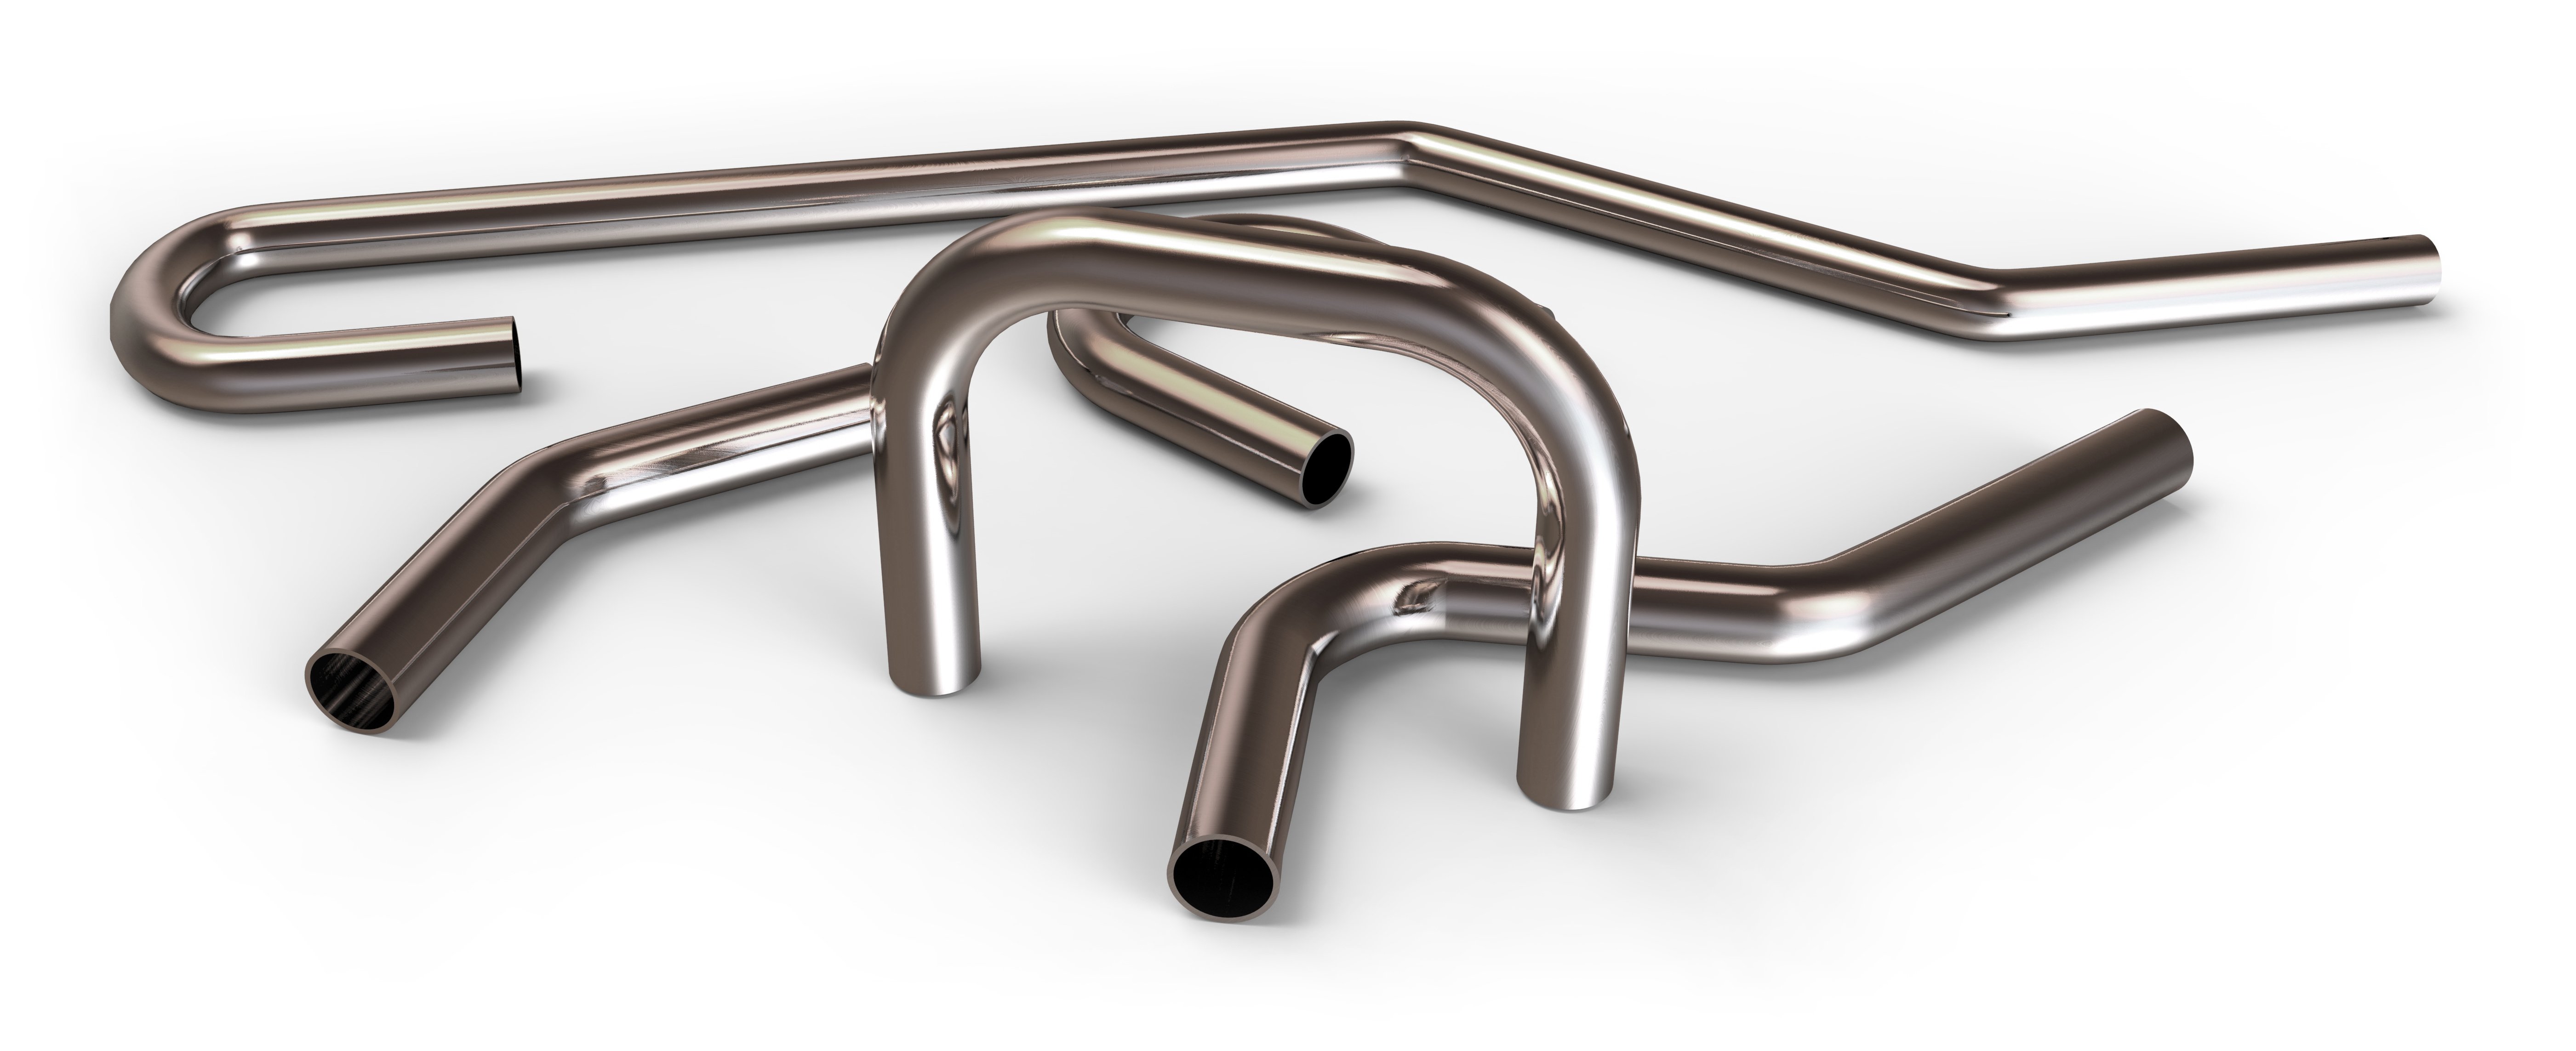 Pipes that have undergone the bending process. Source: frog/Adobe Stock